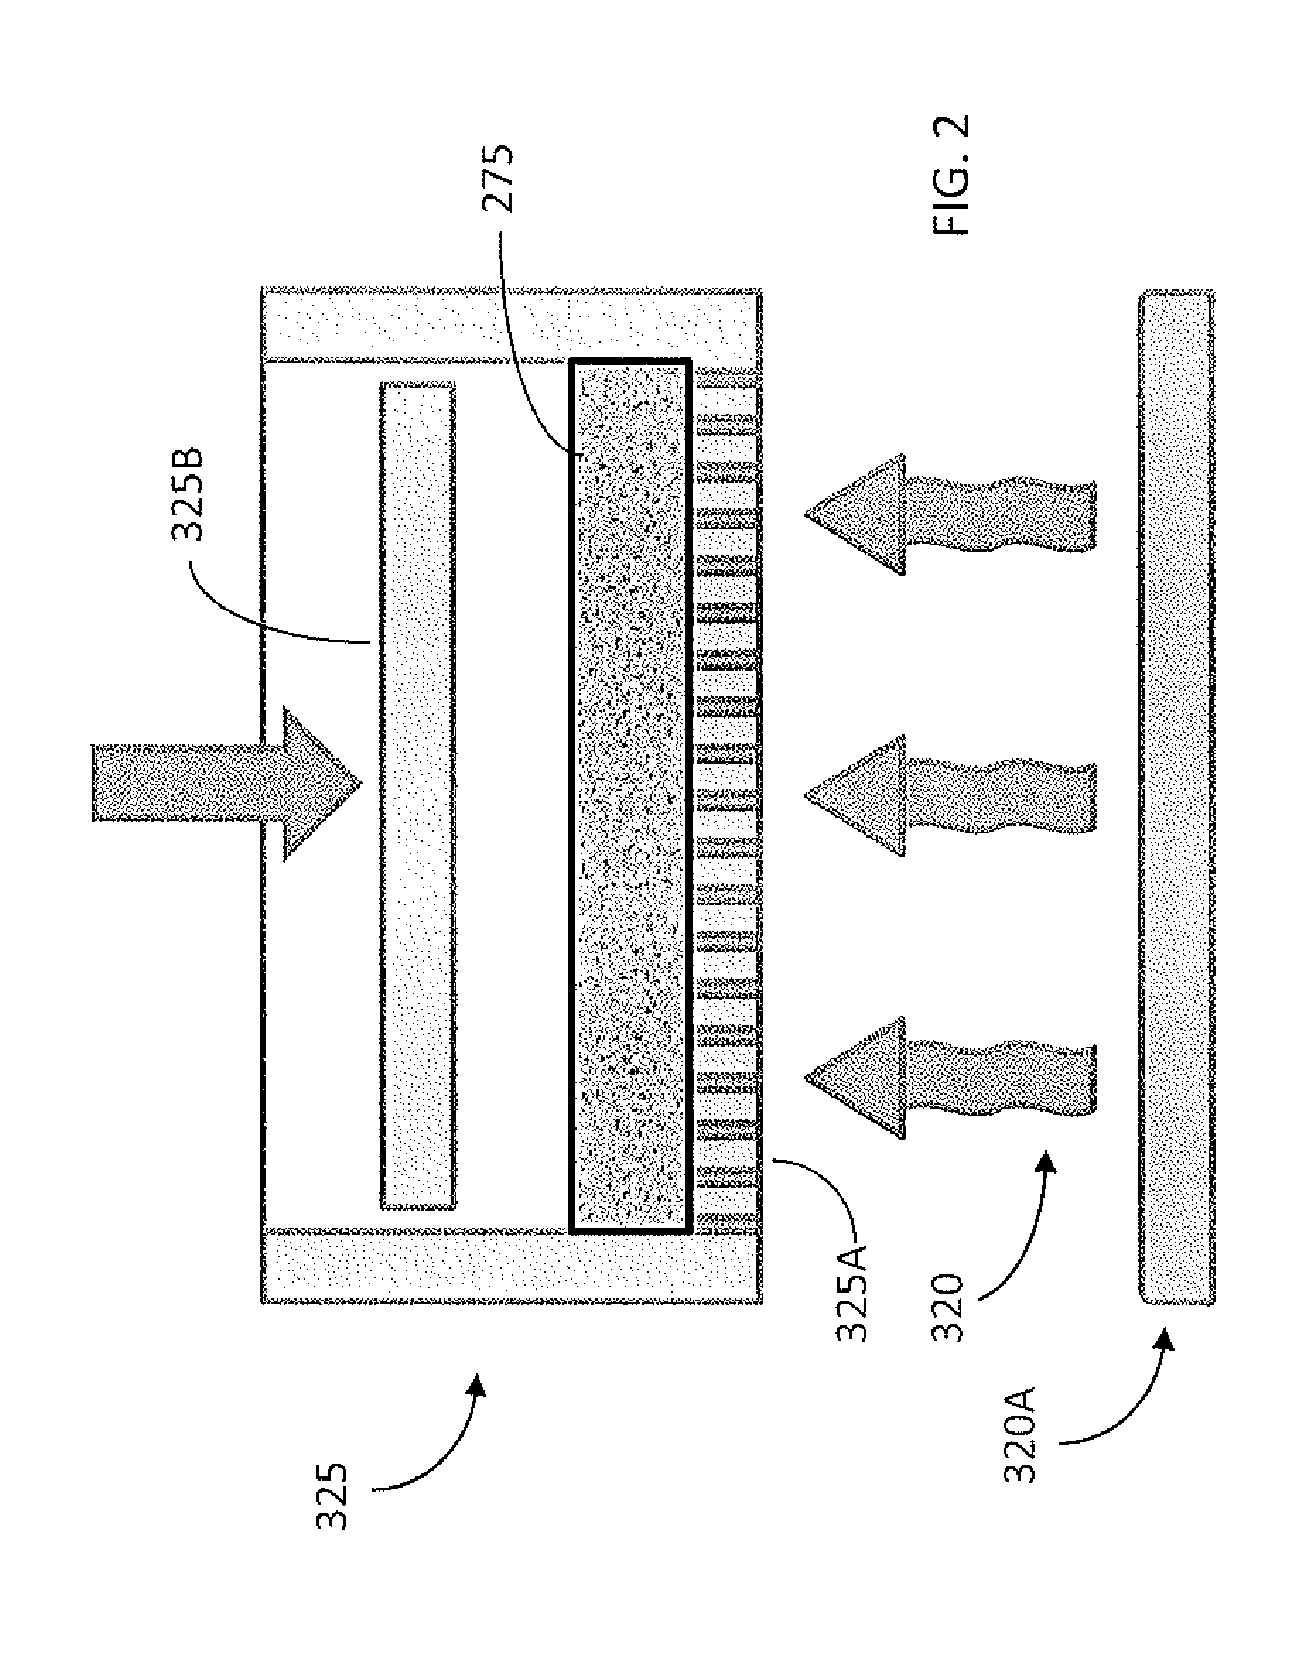 Method for forming a fire resistant cellulose product, and associated apparatus